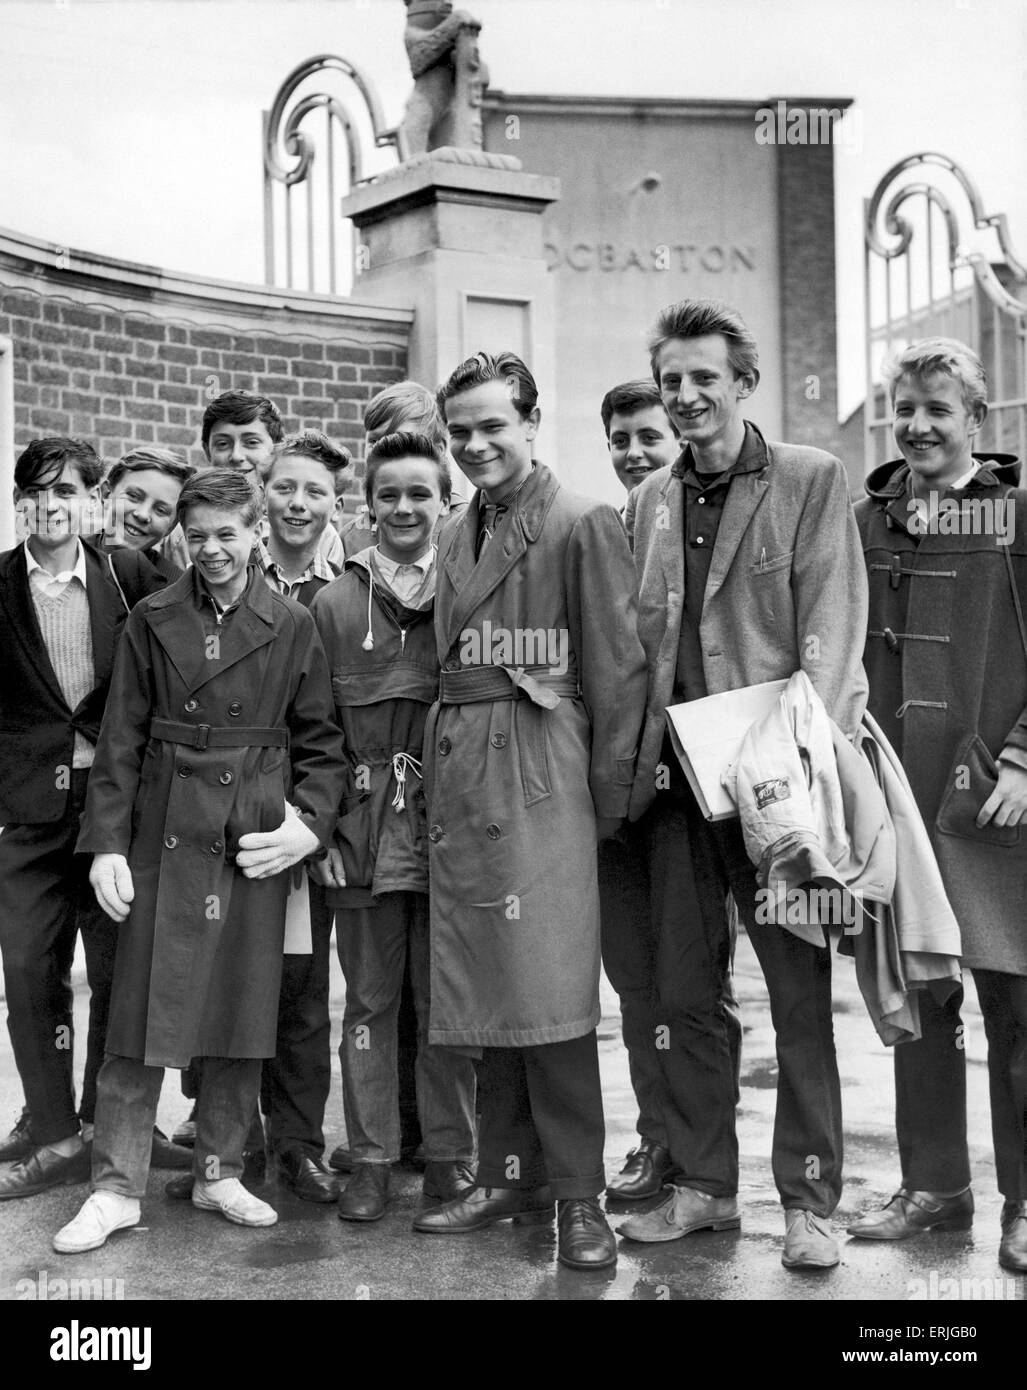 Australian cricket tour of England for the Ashes. England v Australia First Test match at Edgbaston. The Gower Street Secondary Modern School cricket team arrive for the firtst day of the first test, the first members of the public to arrive. 8th June 1961. Stock Photo